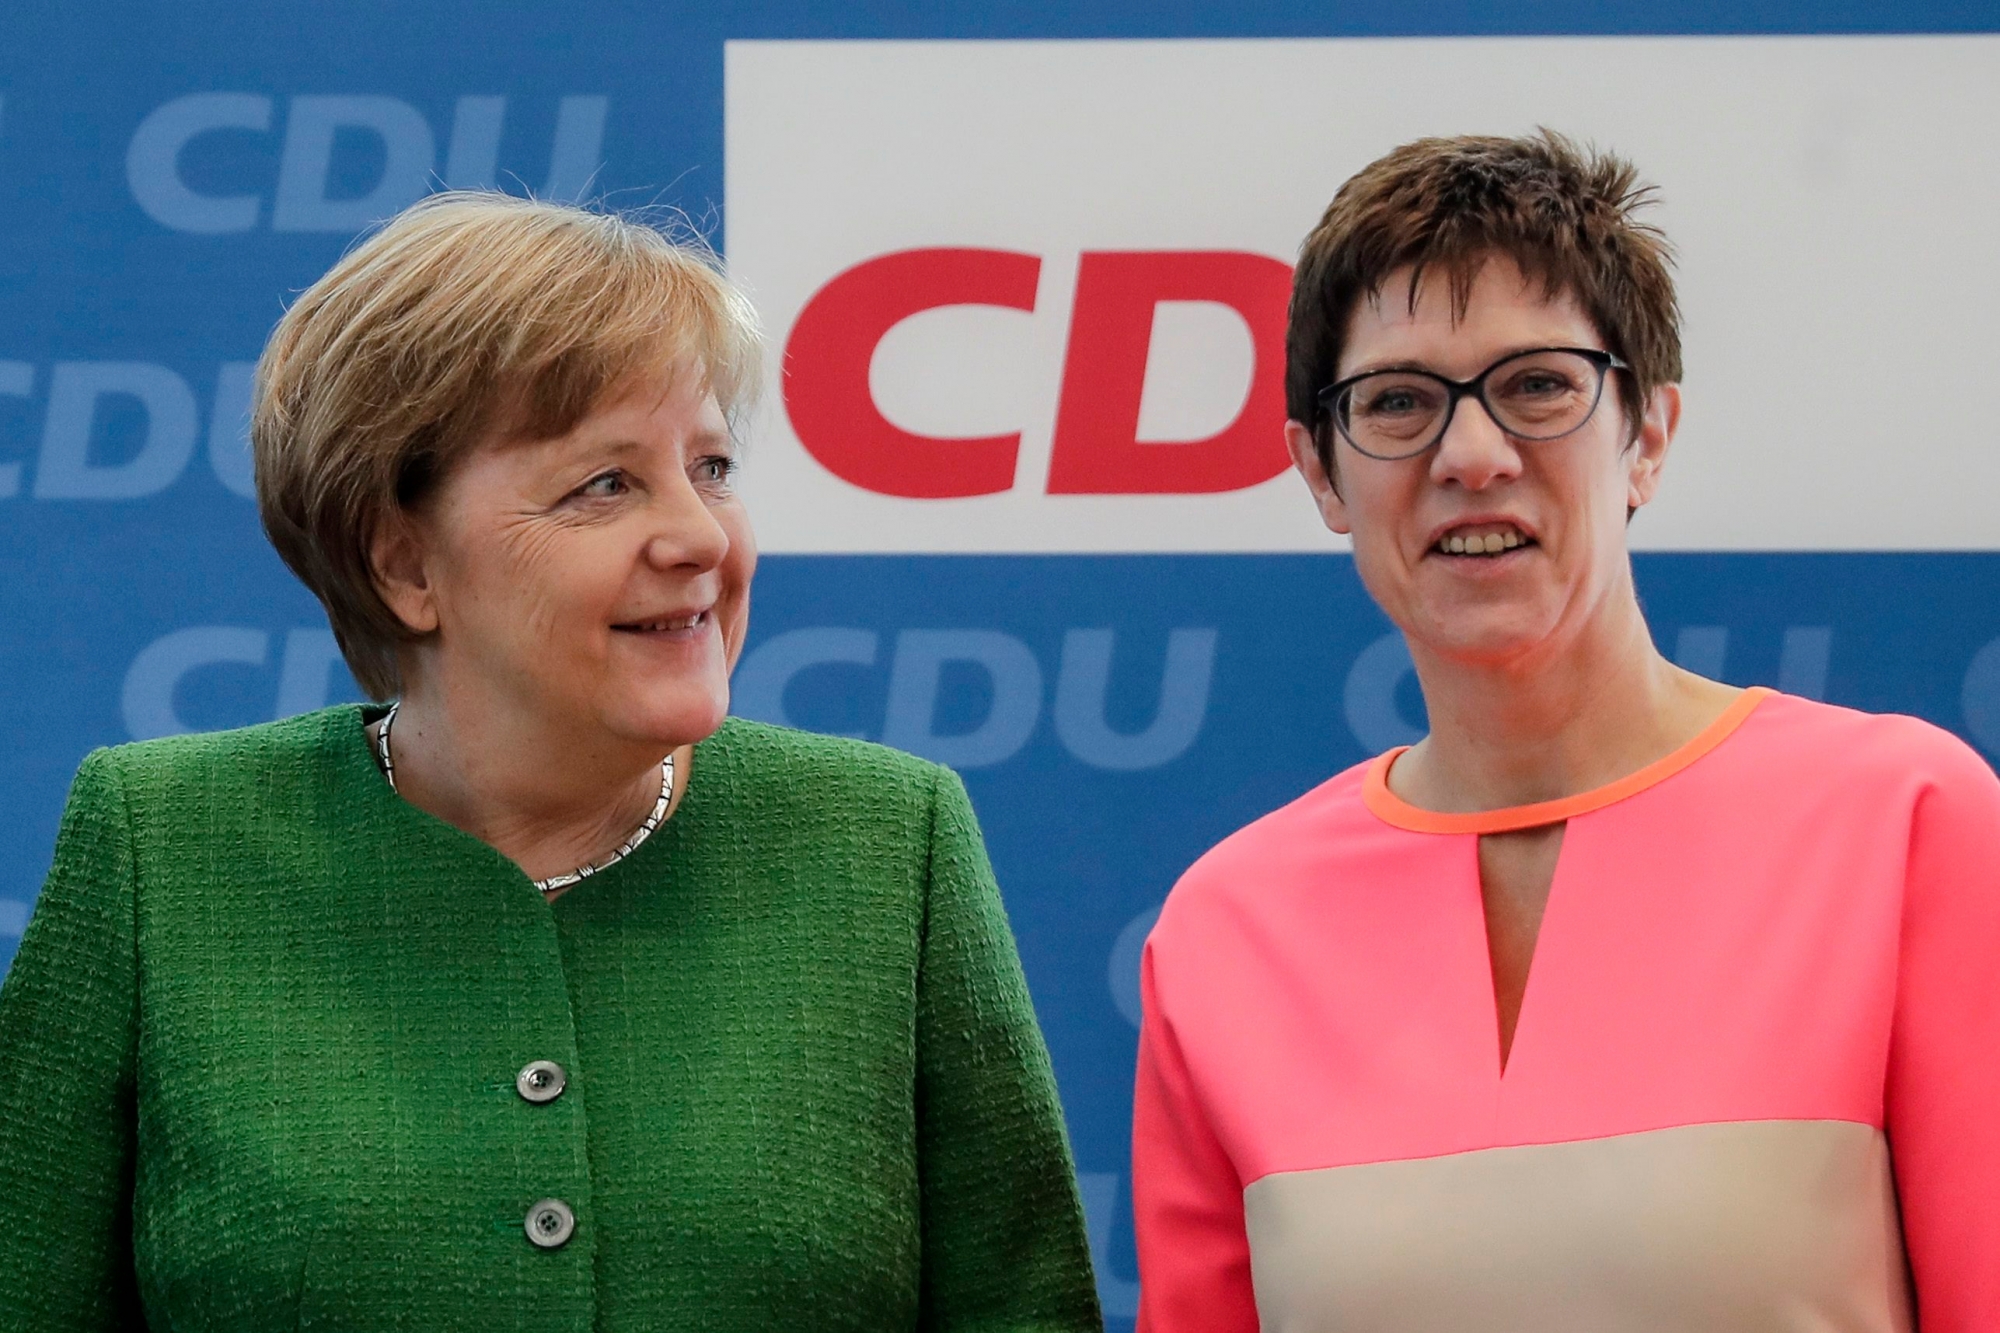 FILE - In this Monday, Feb. 19, 2018 file photo German Chancellor Angela Merkel, left, and the governor of German Saarland state and designated Christian Democratic Union party General Secretary, Annegret Kramp-Karrenbauer, right, attend a party leaders' meeting in Berlin, Germany. The CDU's general secretary since February, Kramp-Karrenbauer _ often called 'AKK' _ is a Merkel ally and the closest to her centrist stance. She touts her own lengthy experience in regional government, which saw her become the first woman to become a state's interior minister, or top security official, and serve as governor of western Saarland state. (AP Photo/Markus Schreiber, file) Germany Merkel's Party